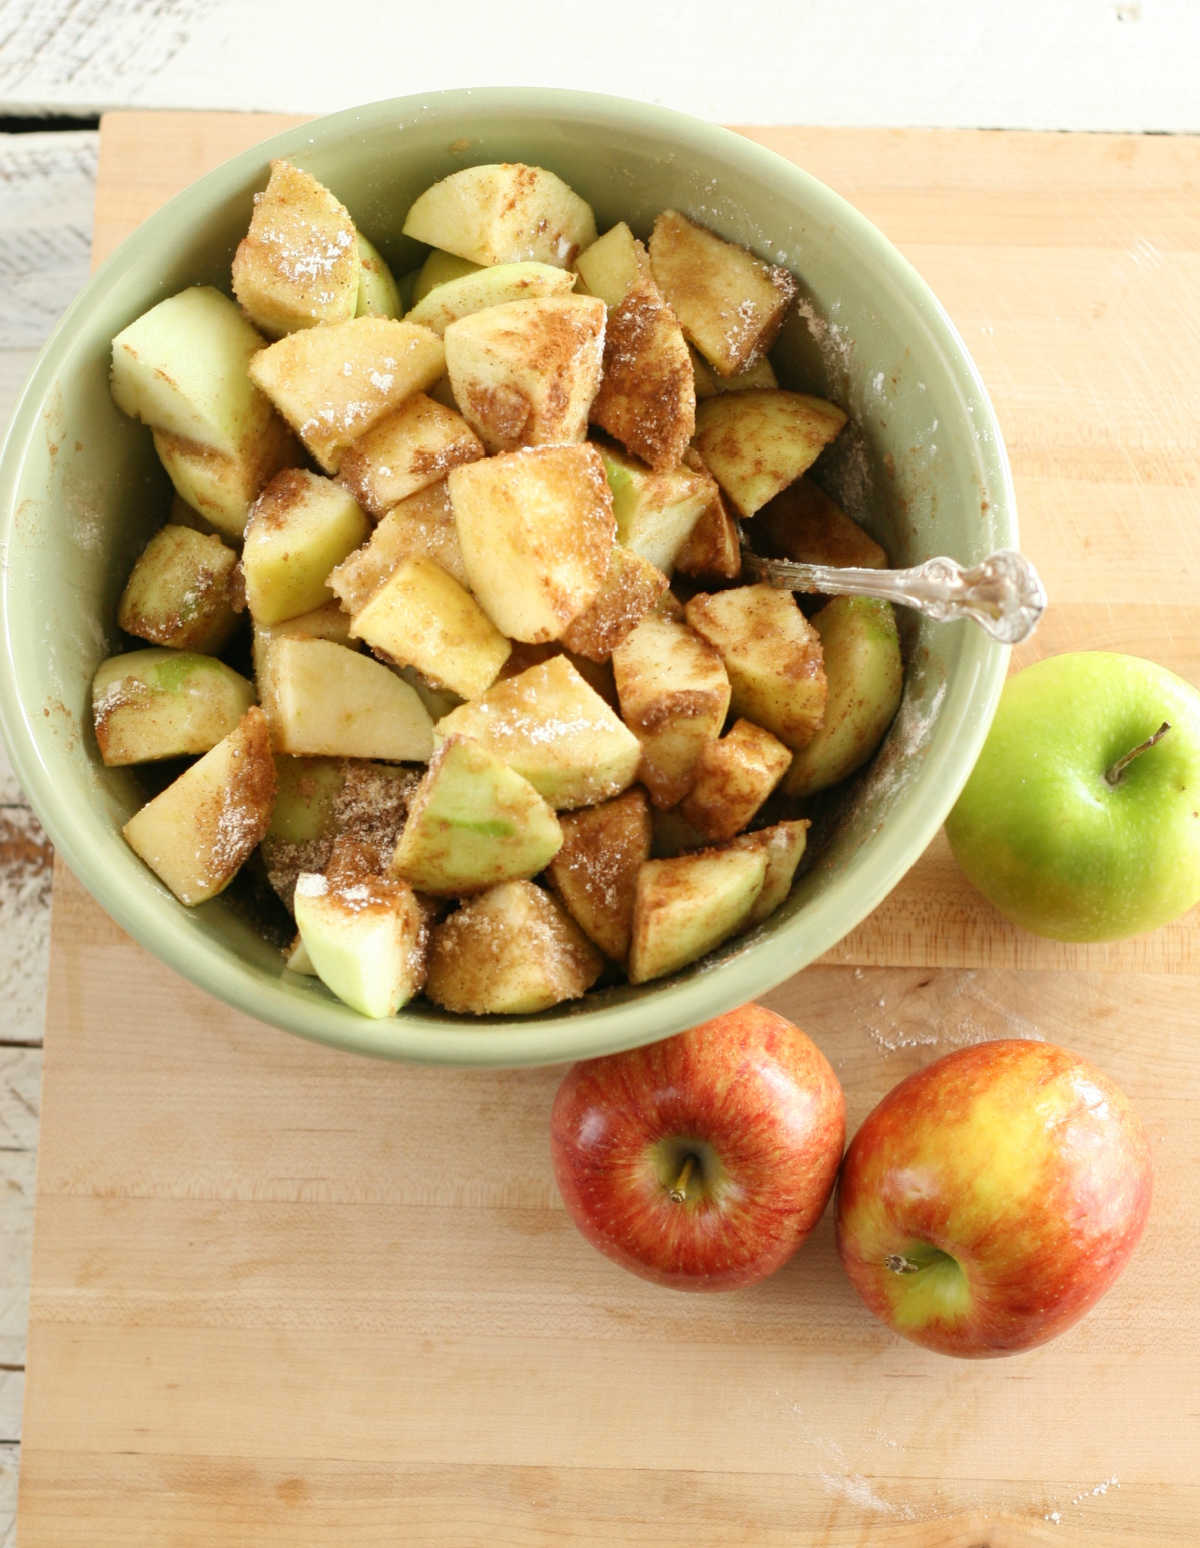 Apple slices in pale green bowl on wooden cutting board, green and red apples around.